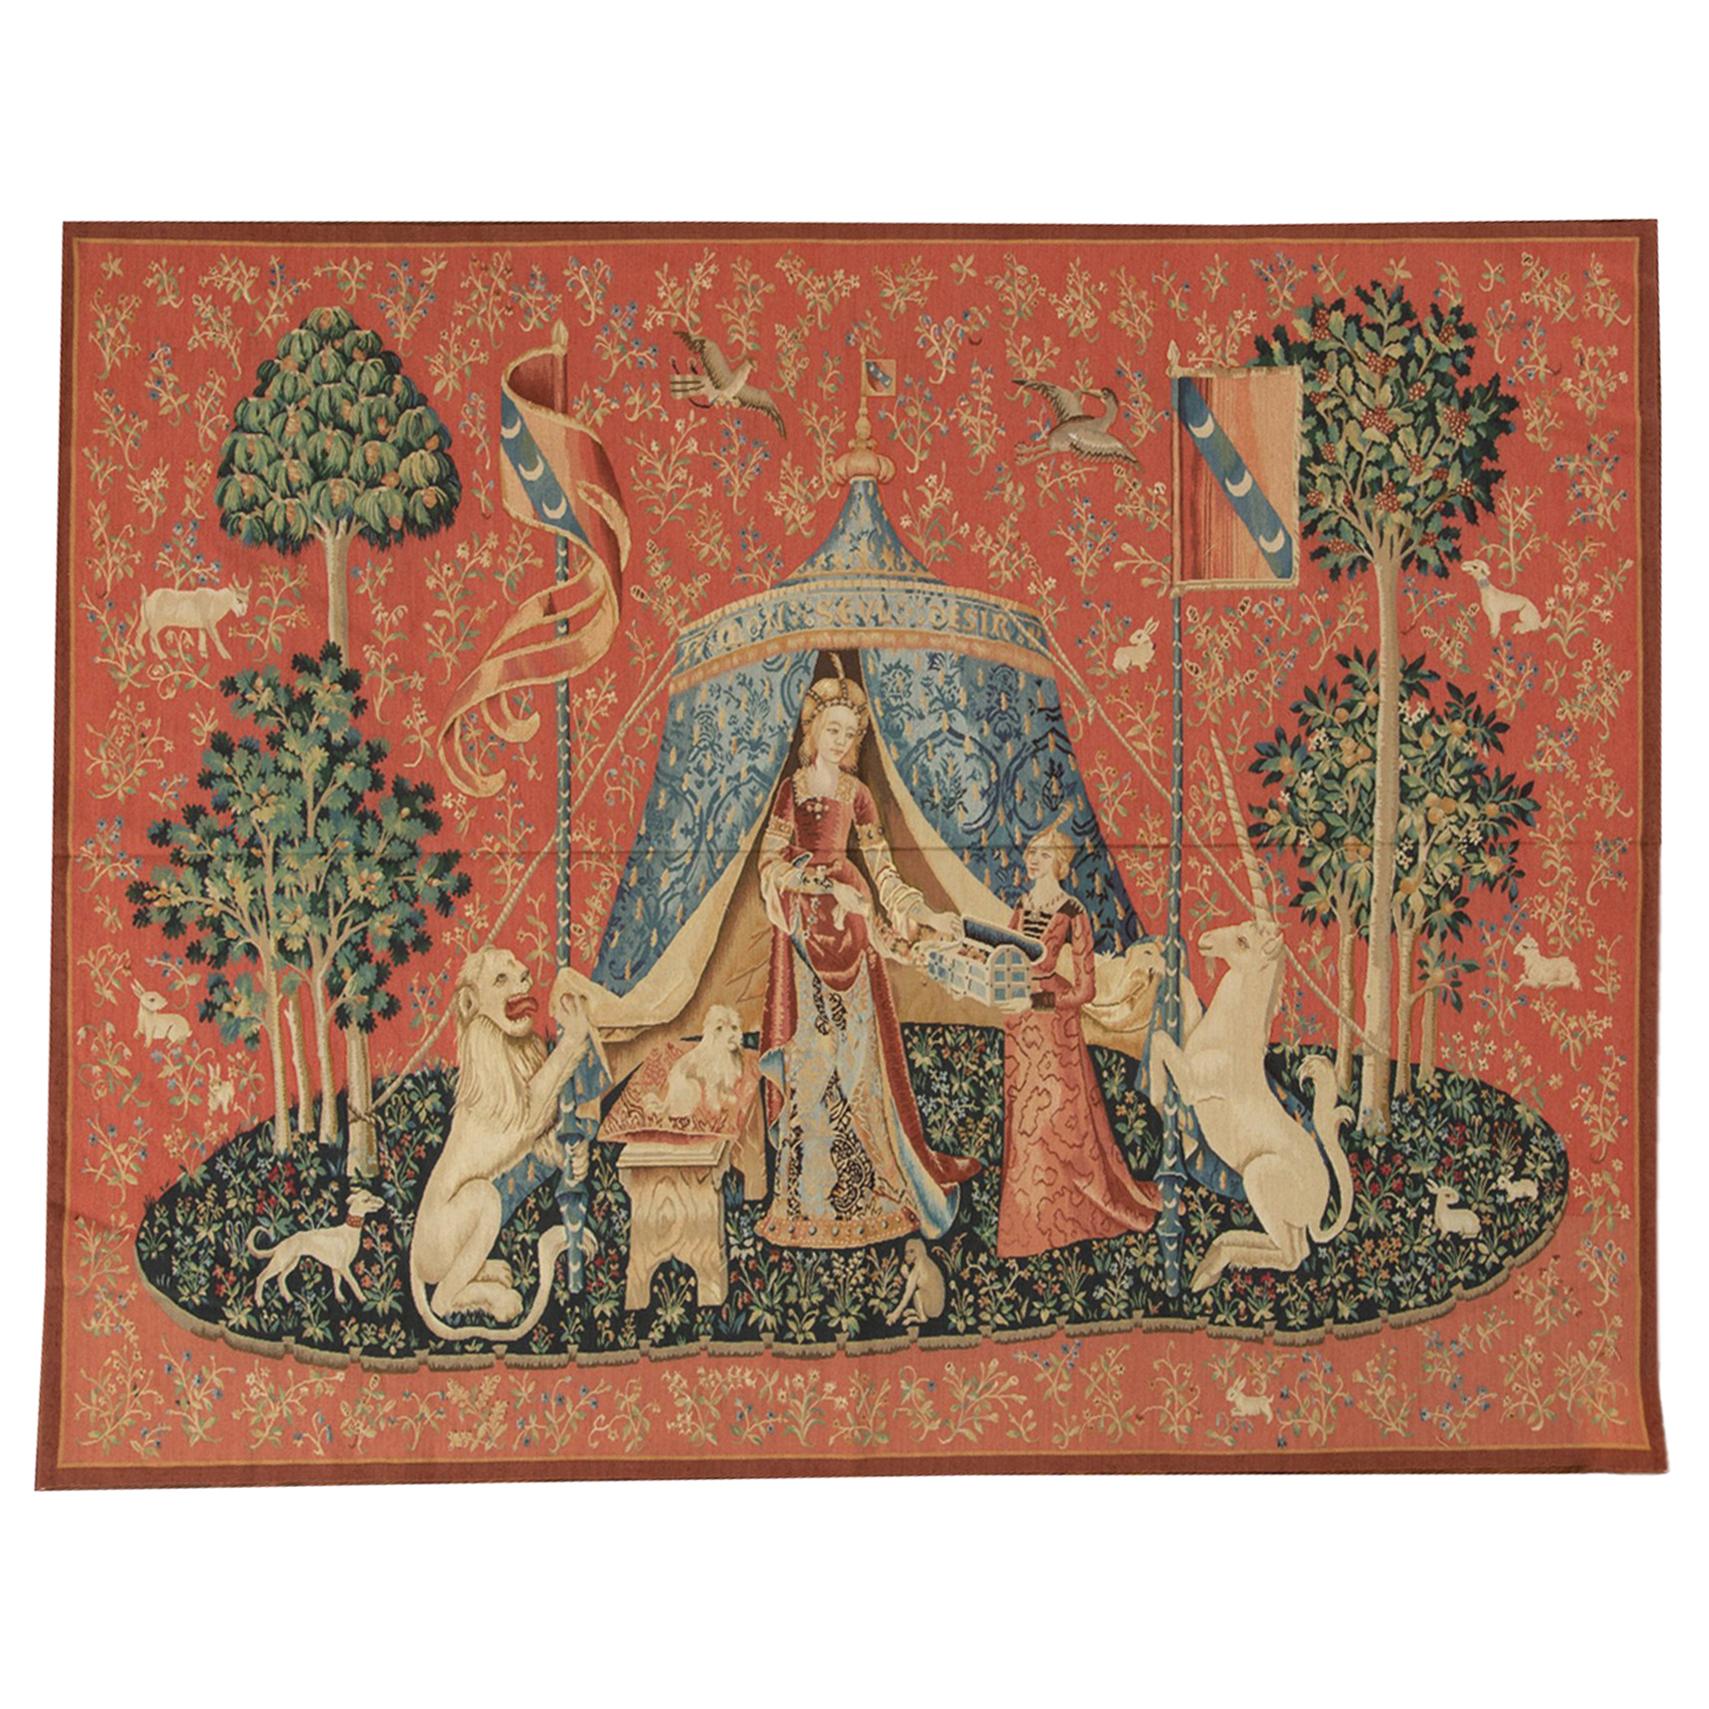 15th Century Tapestry Recreation, "Taste" From the Lady with the Unicorn Series